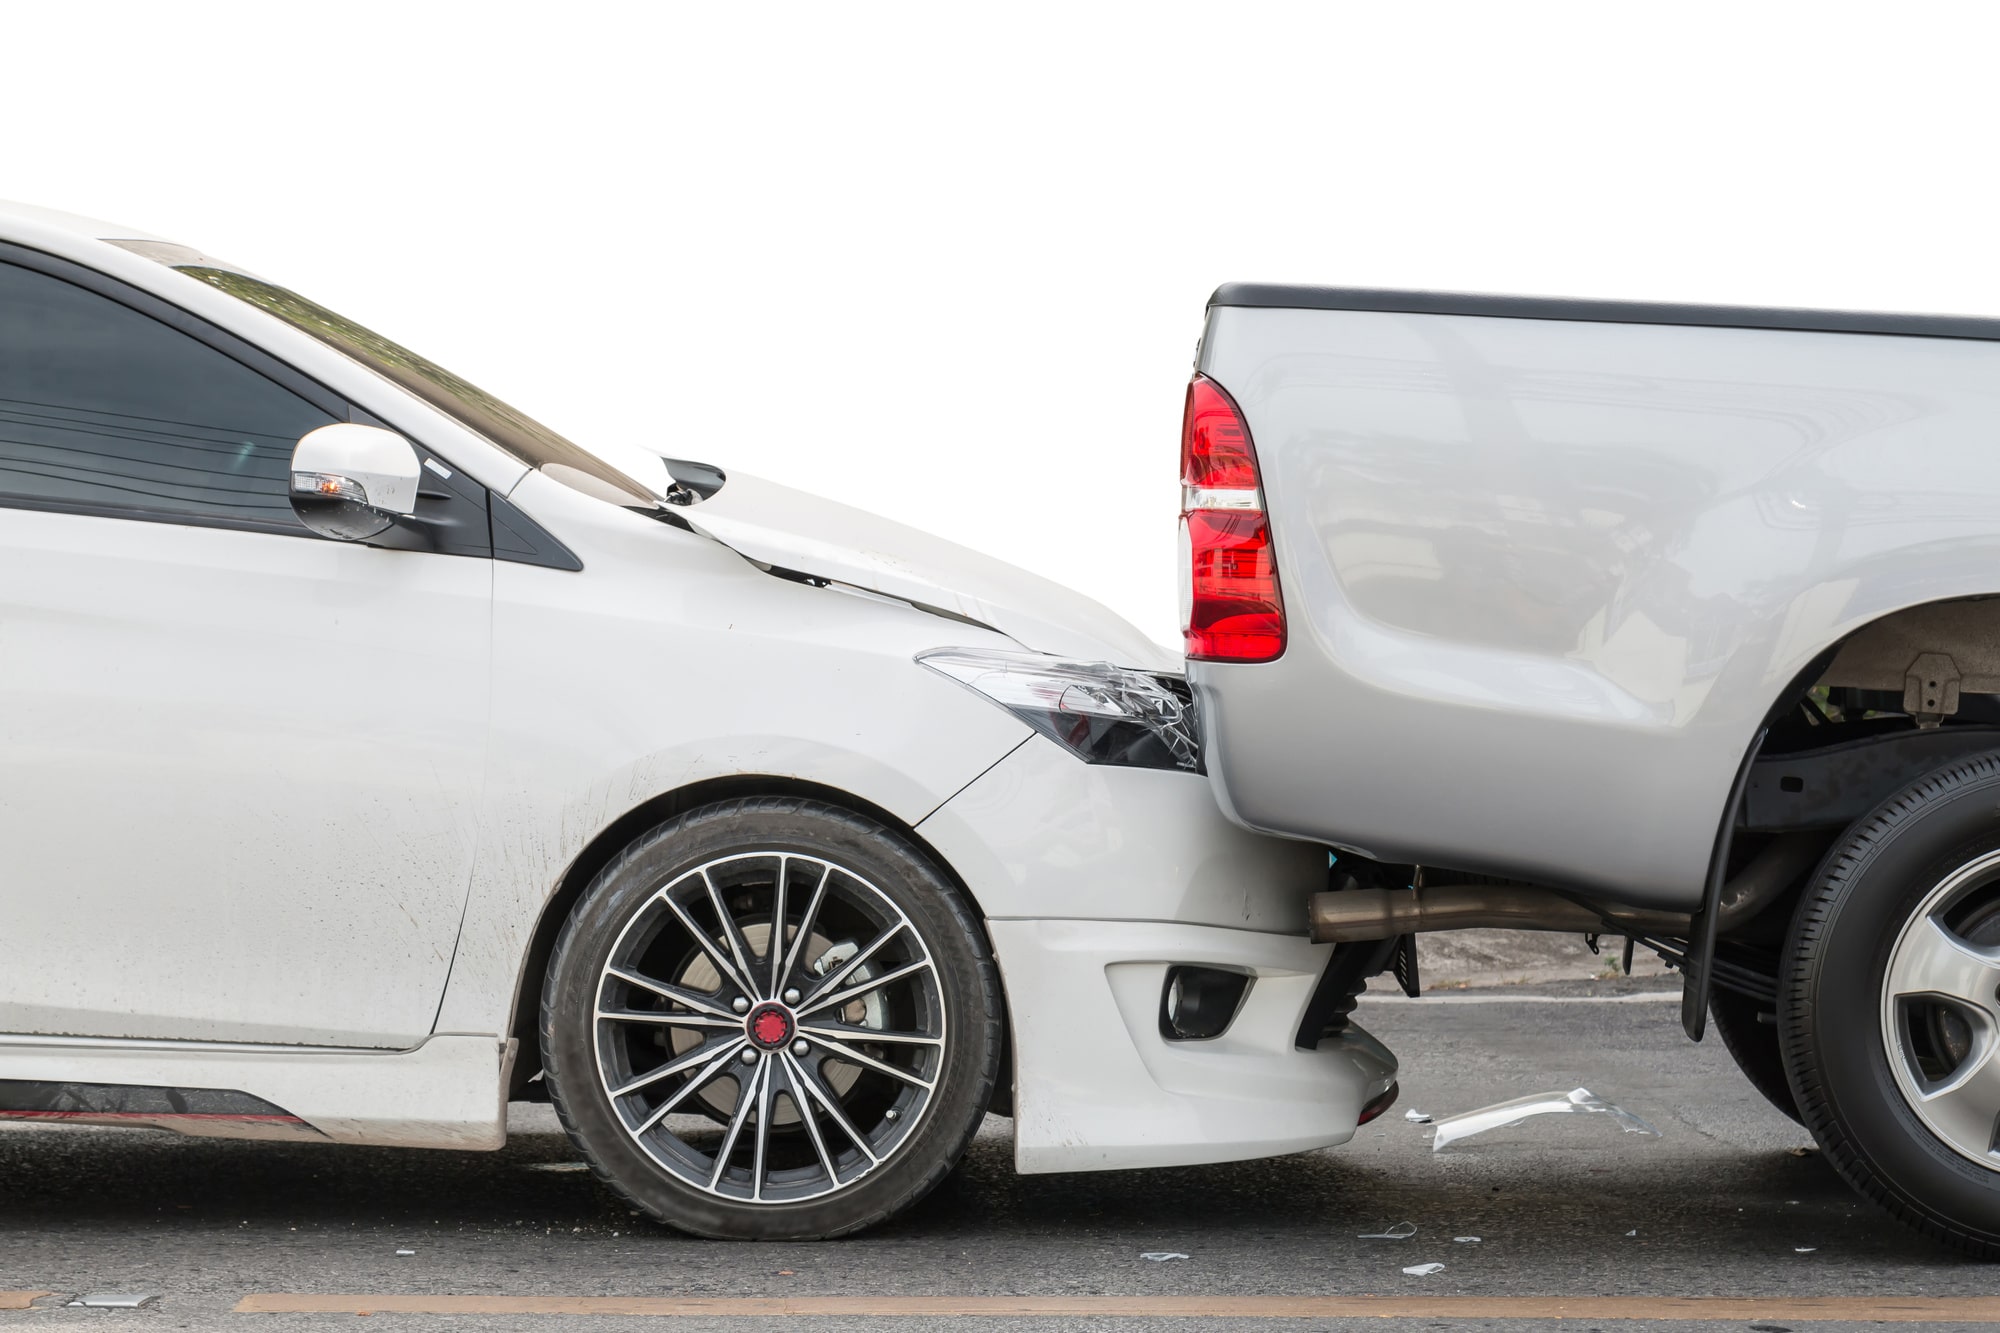 4 Reasons to Go to Urgent Care After a Minor Car Accident